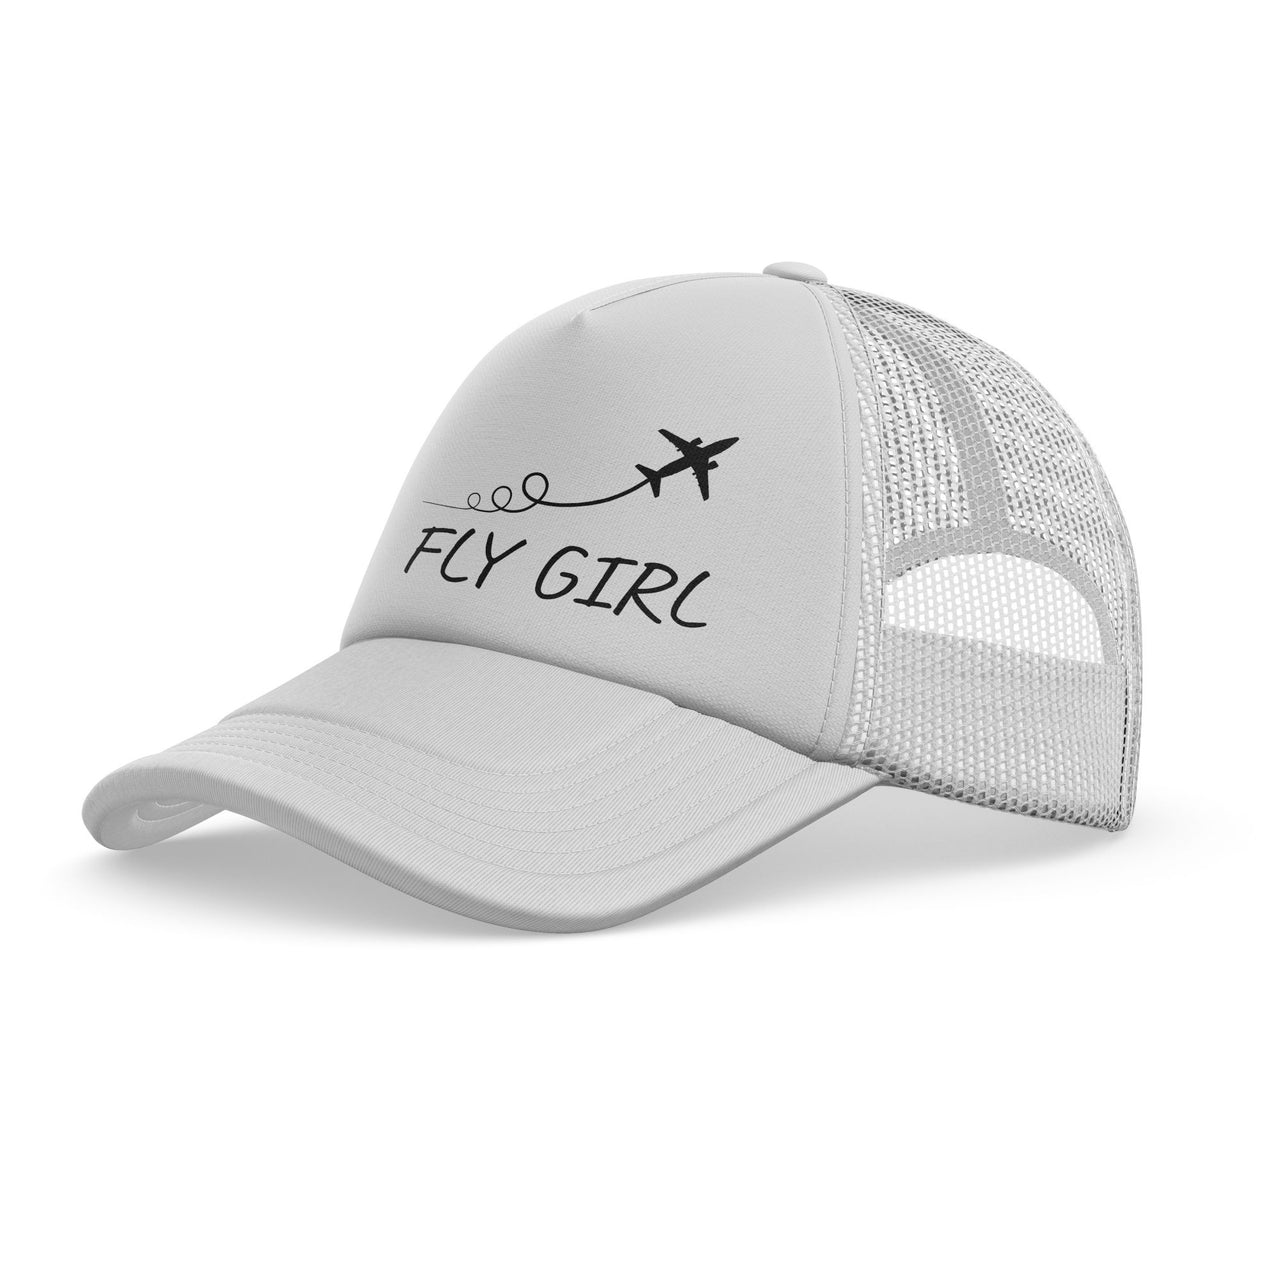 Just Fly It & Fly Girl Designed Trucker Caps & Hats